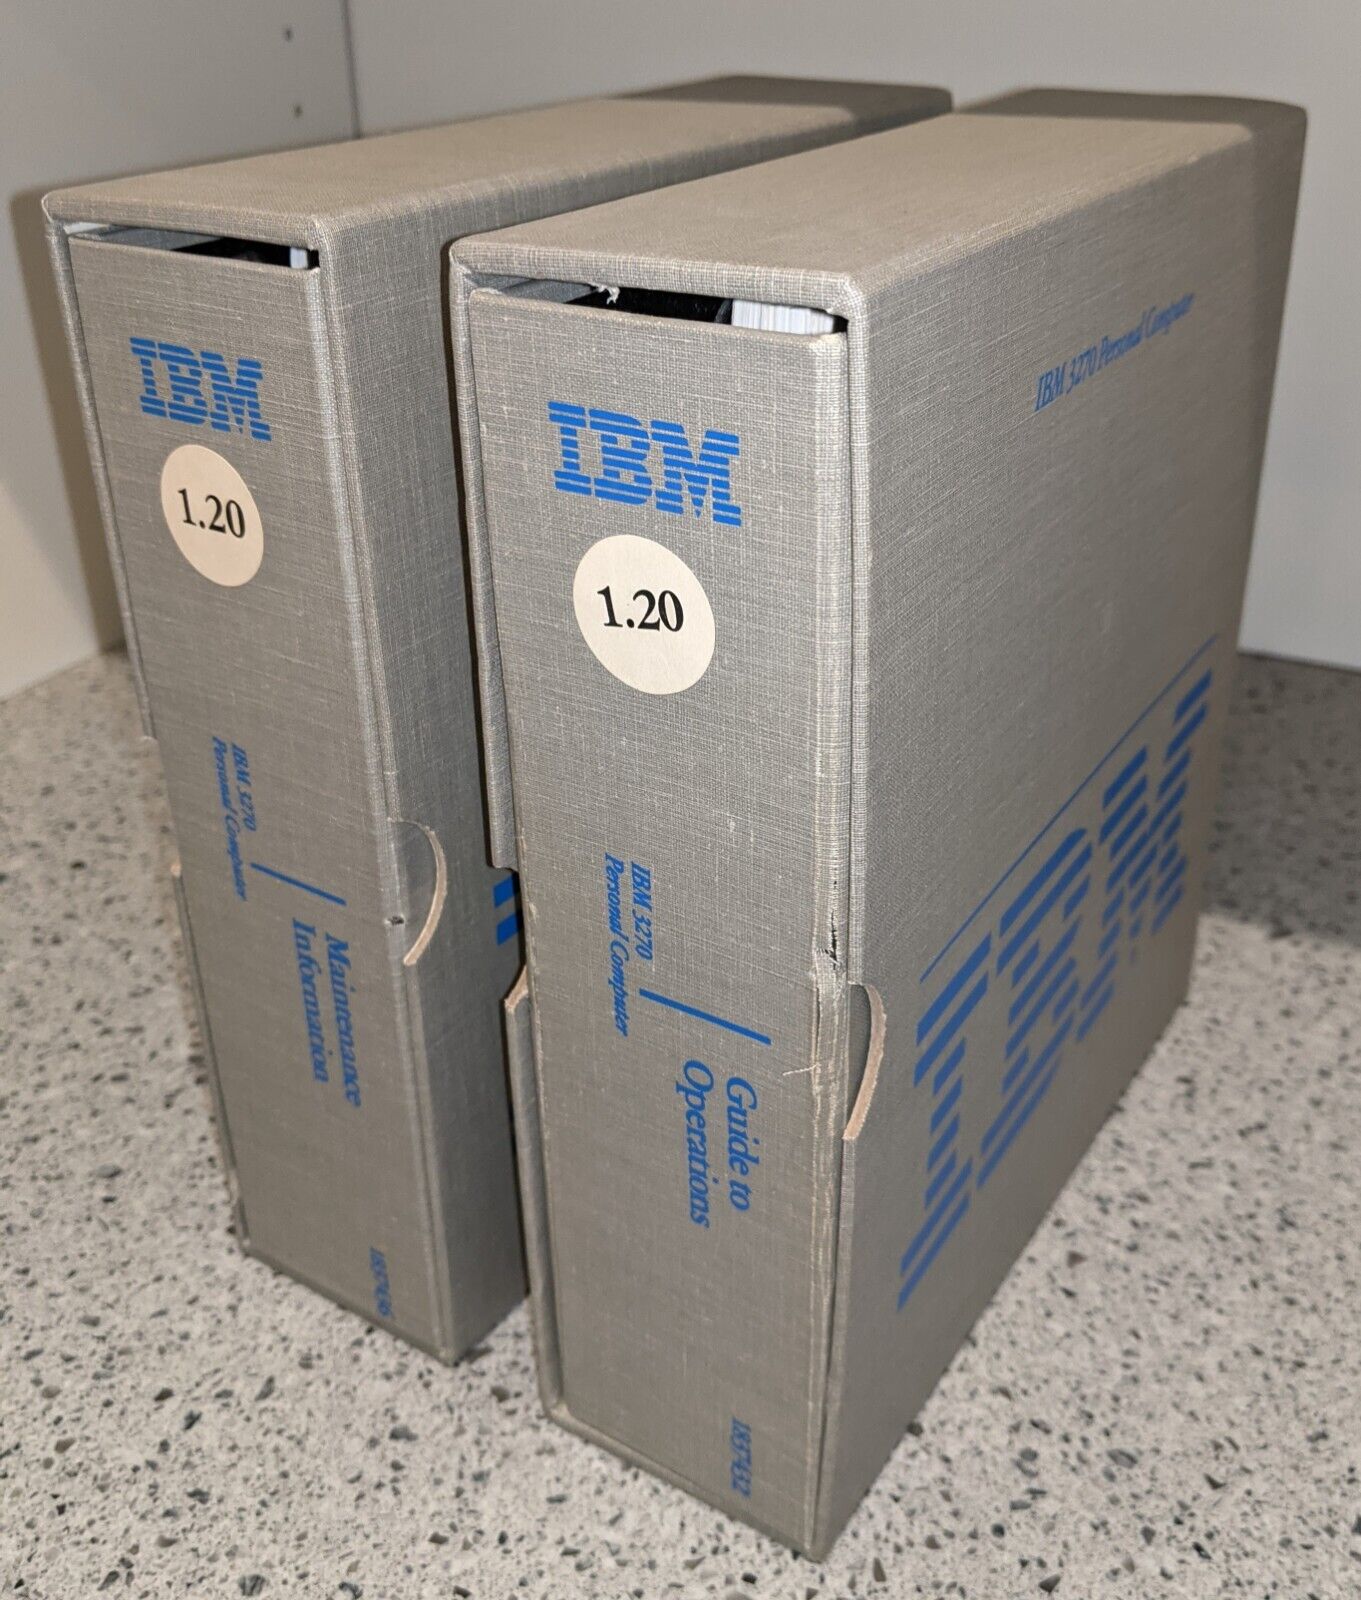 Vintage IBM 3270 PC Maintenance Information and Guide to Operations Books